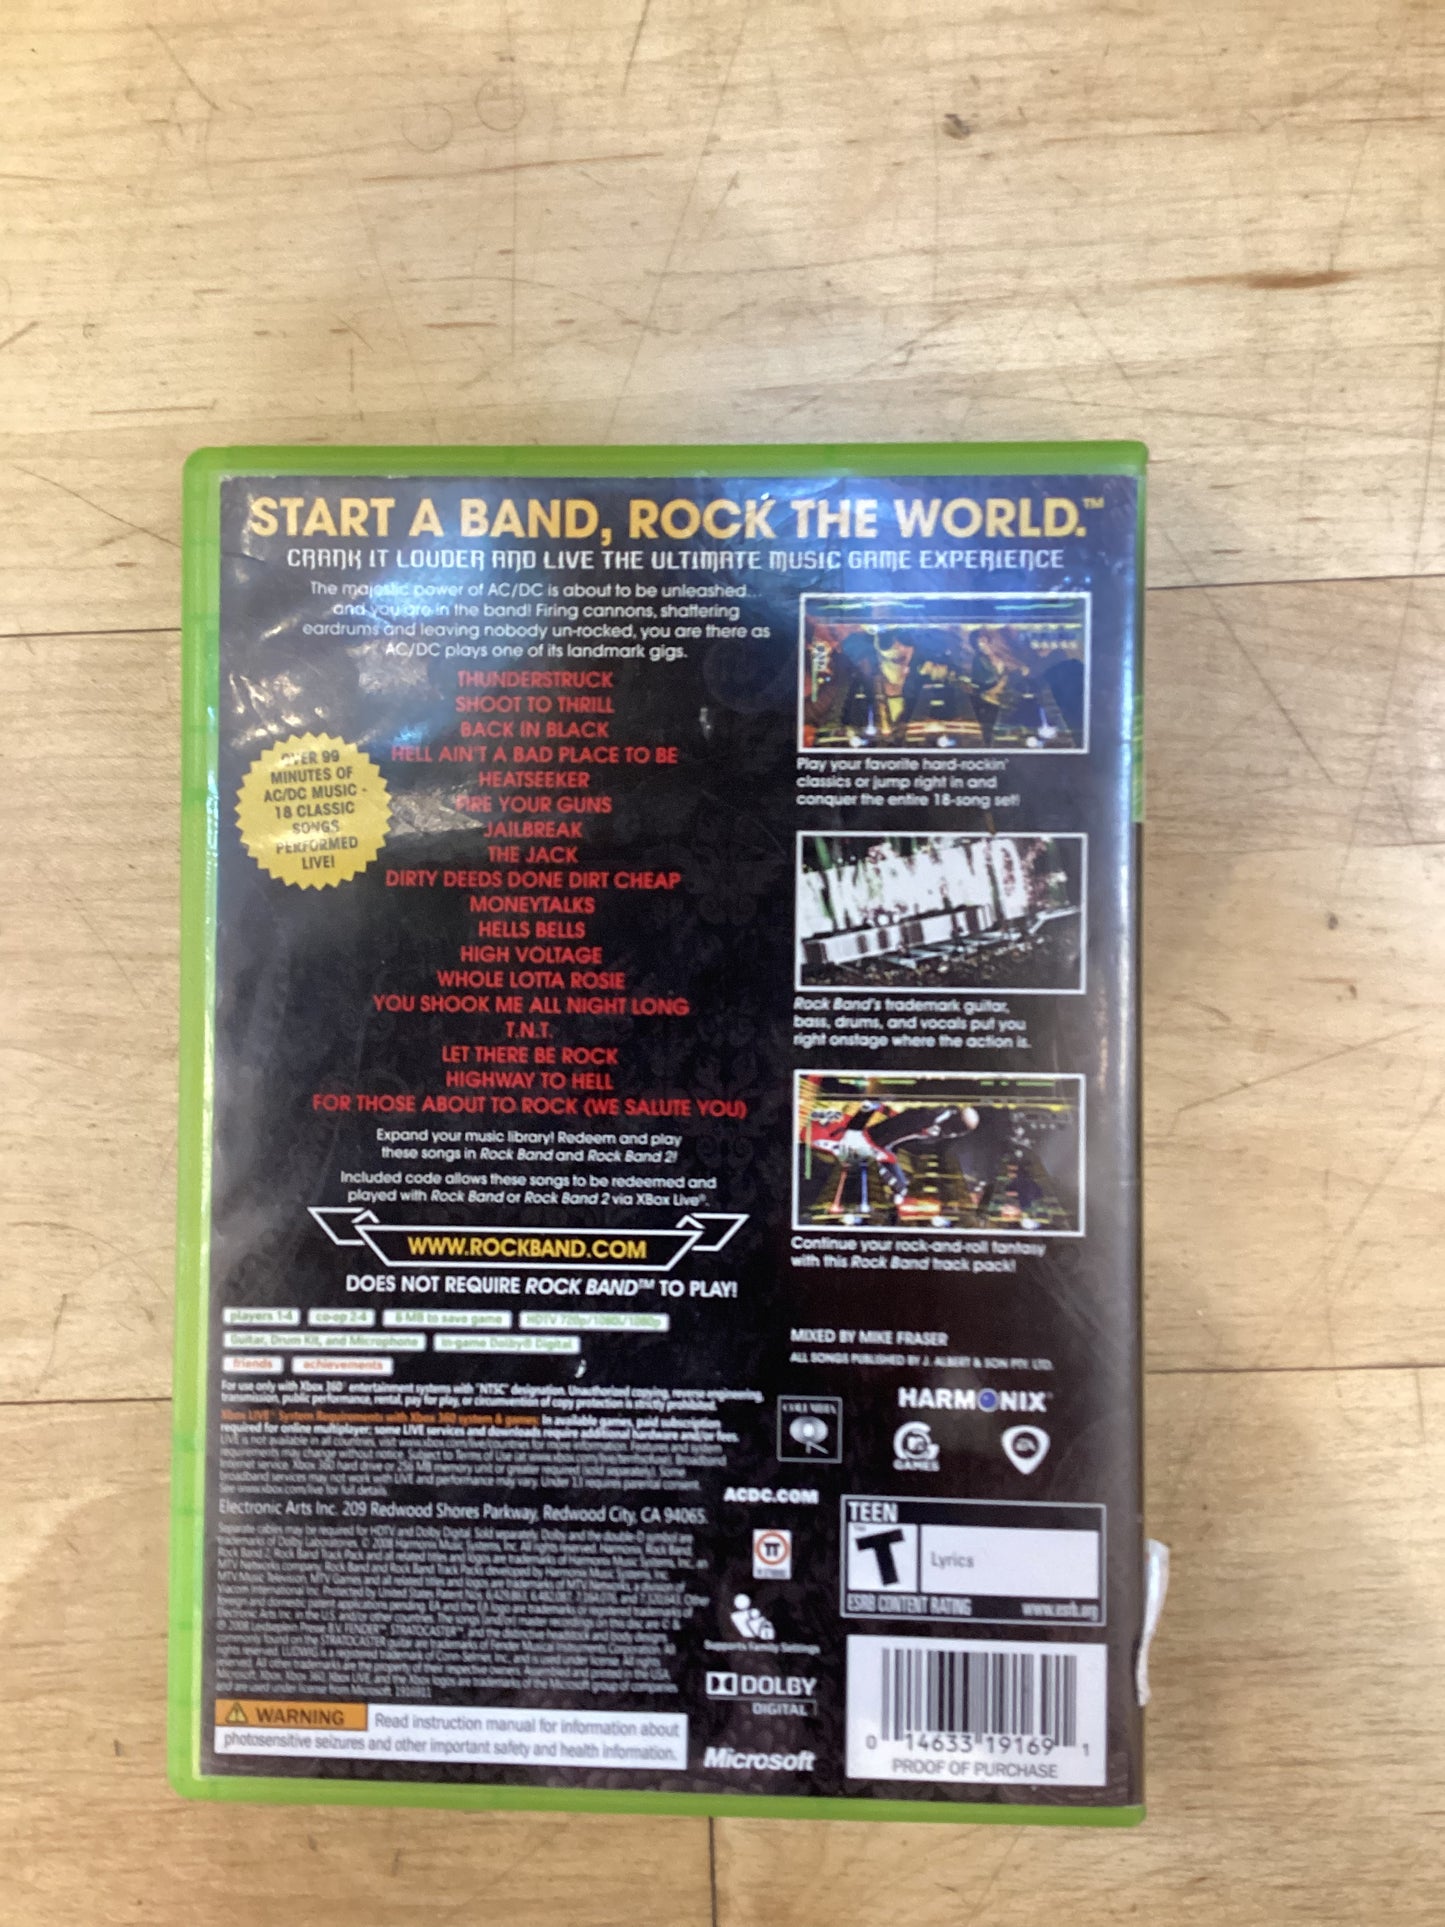 AC/DC Live Rock Band Track Pack - Xbox 360 - Used